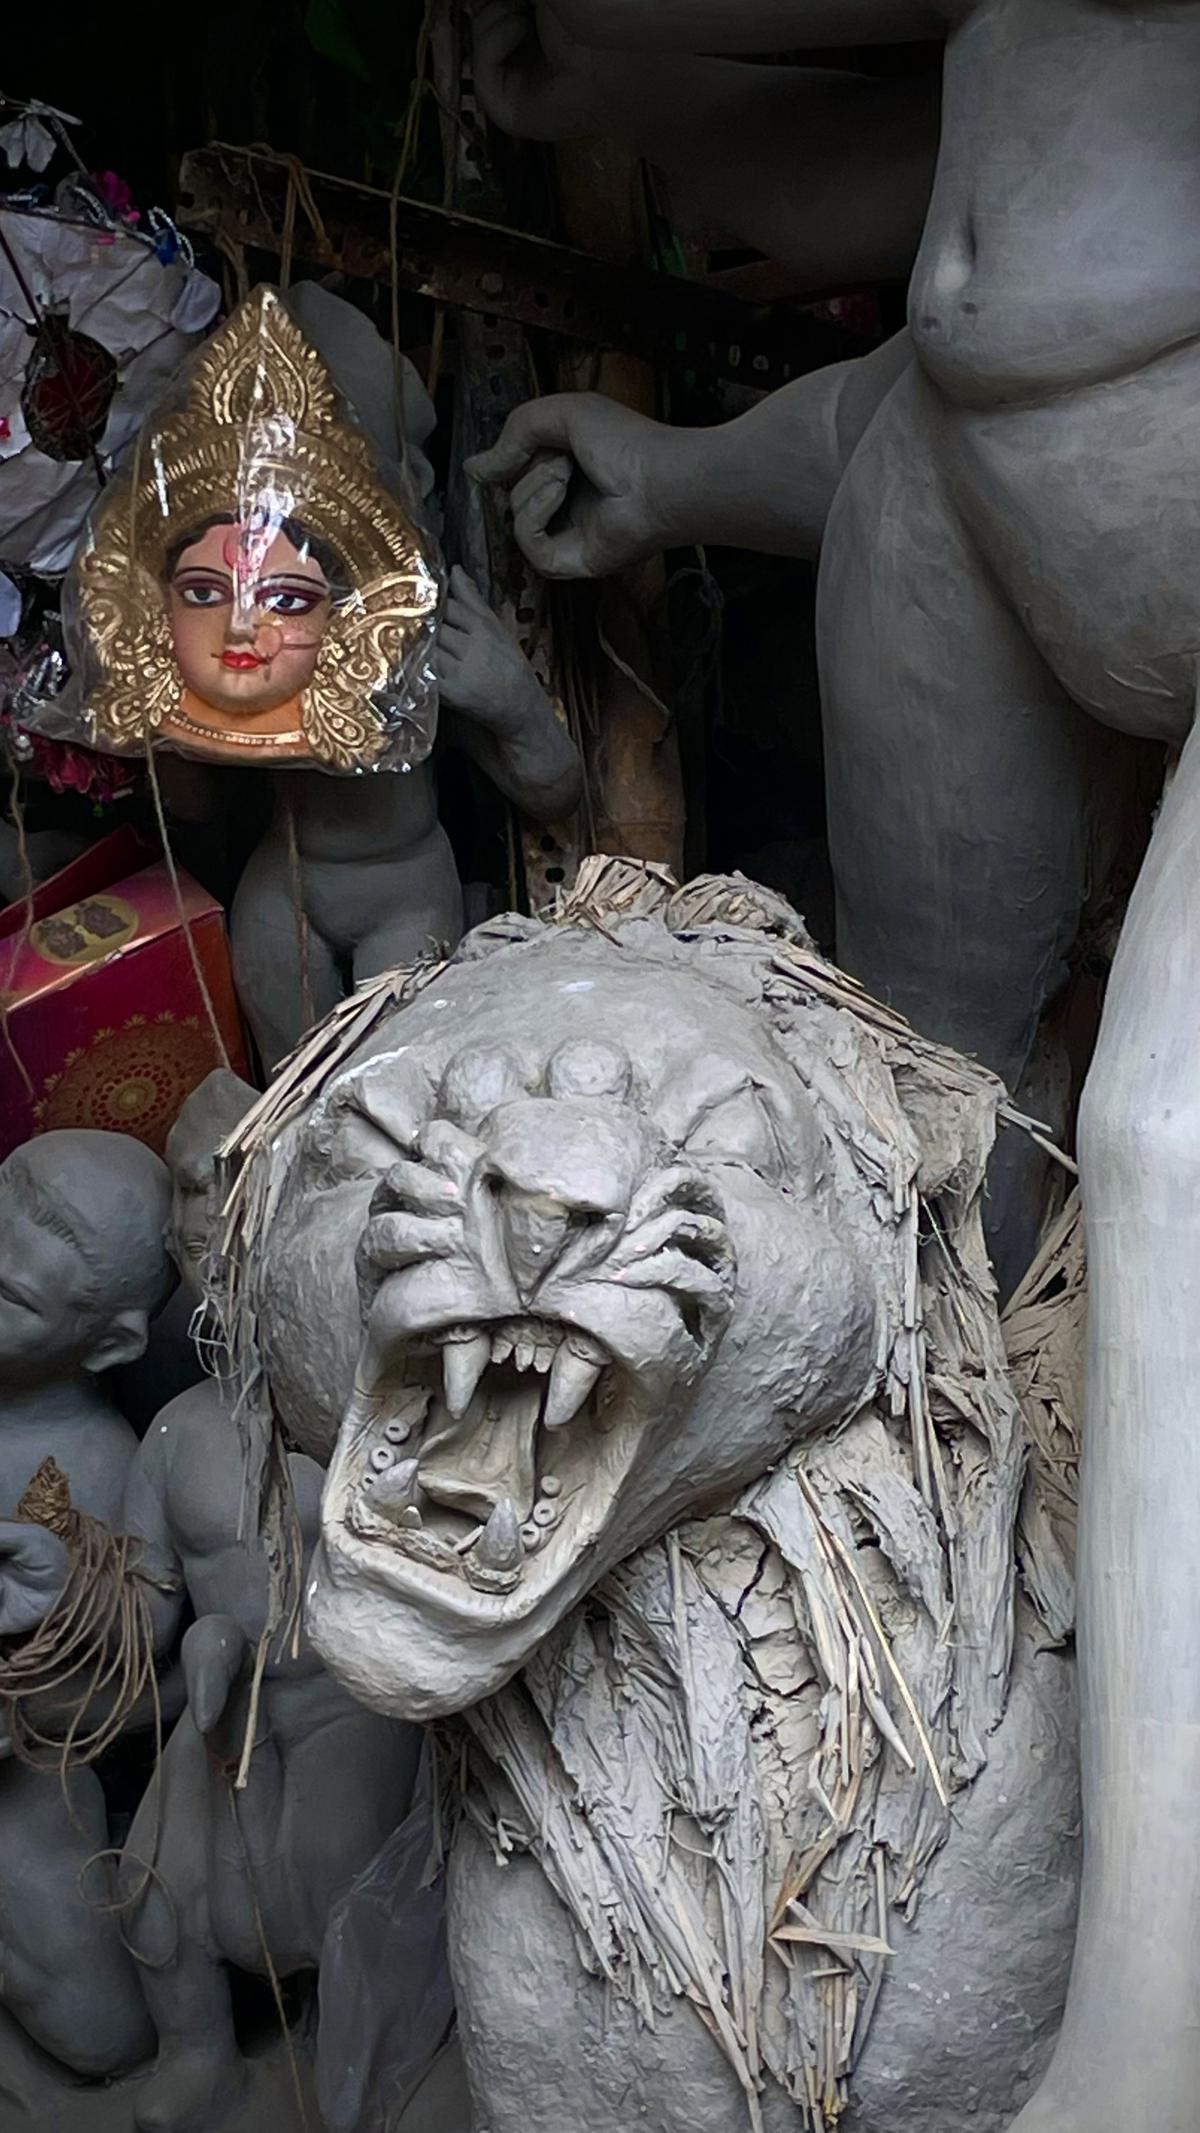 There’s drama at every turn in the alleyways of Kumartuli 